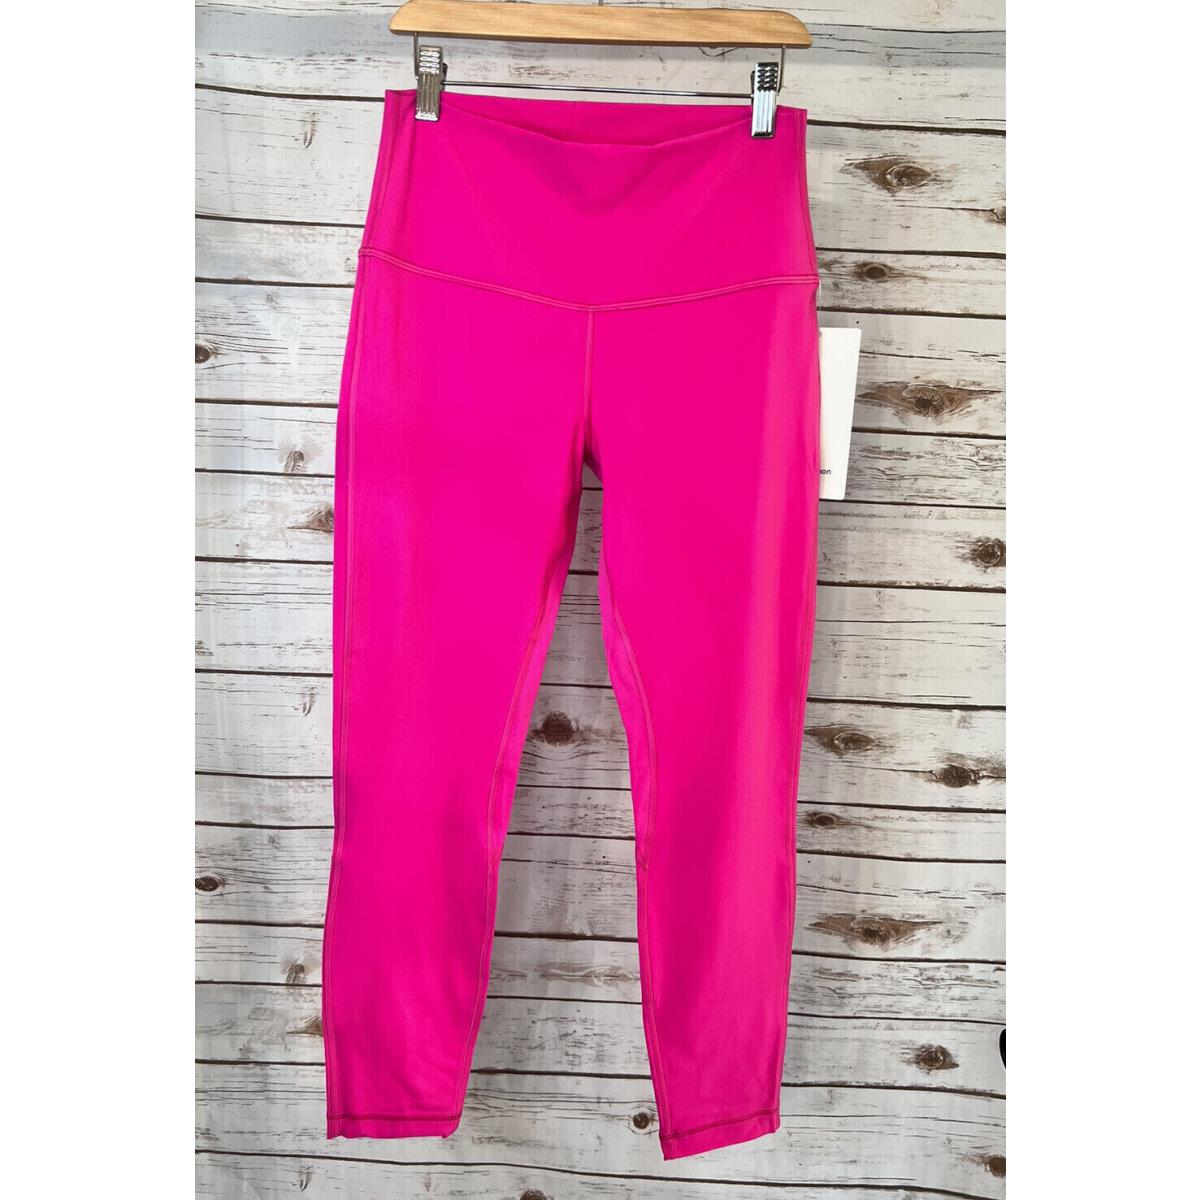 Womens Lululemon Size 6 Align HR Pant 21 Sonic Pink Sncp Nulu Tight Soft